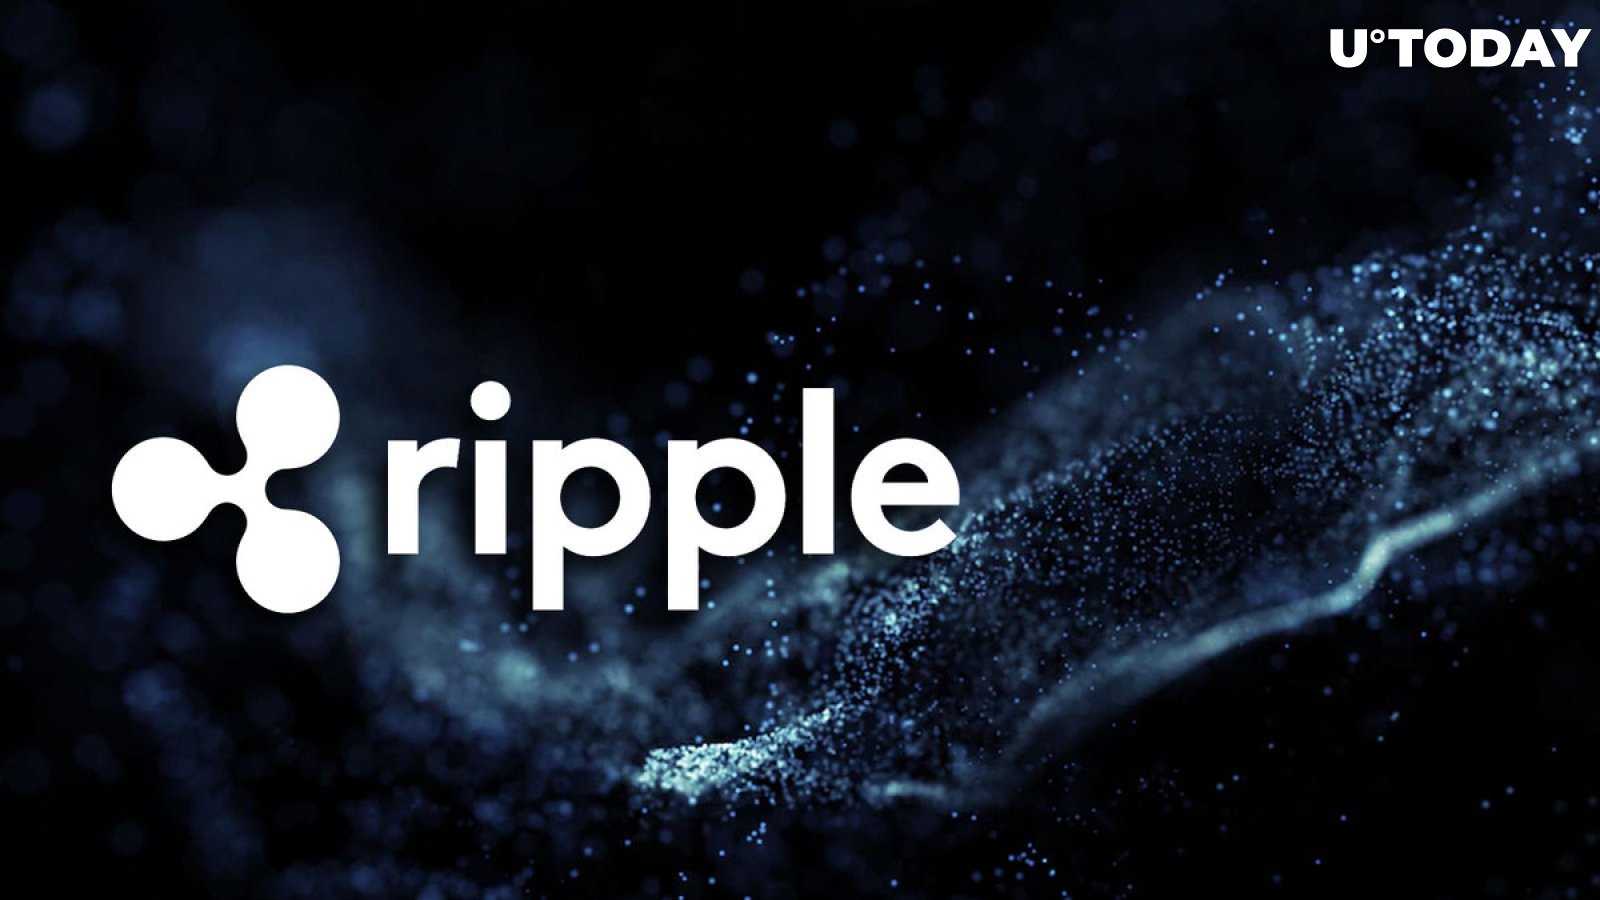 Why is XRP Rising, Something Big Coming for XRP in Ripple Swell?